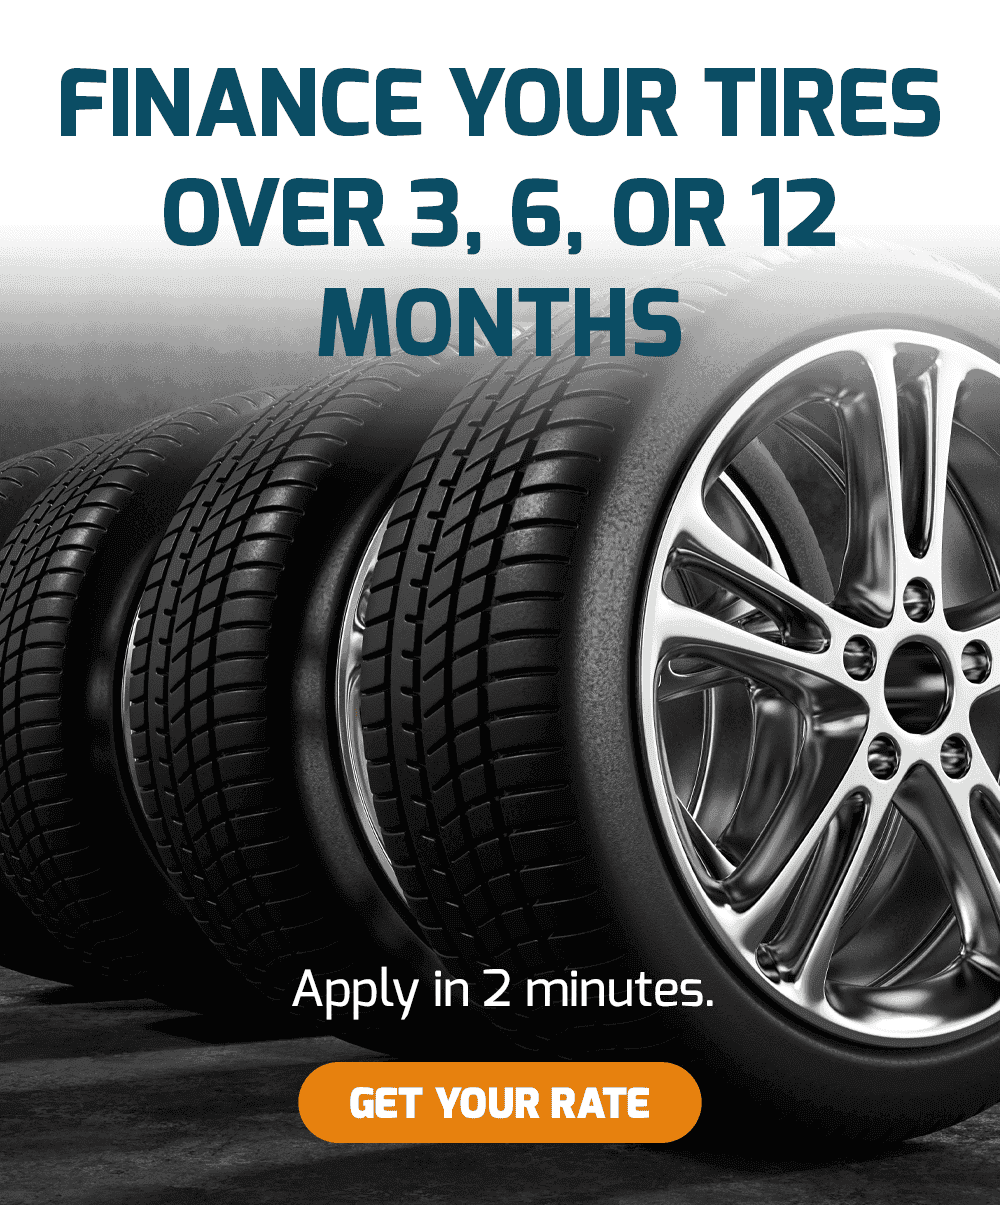 Finance your tires